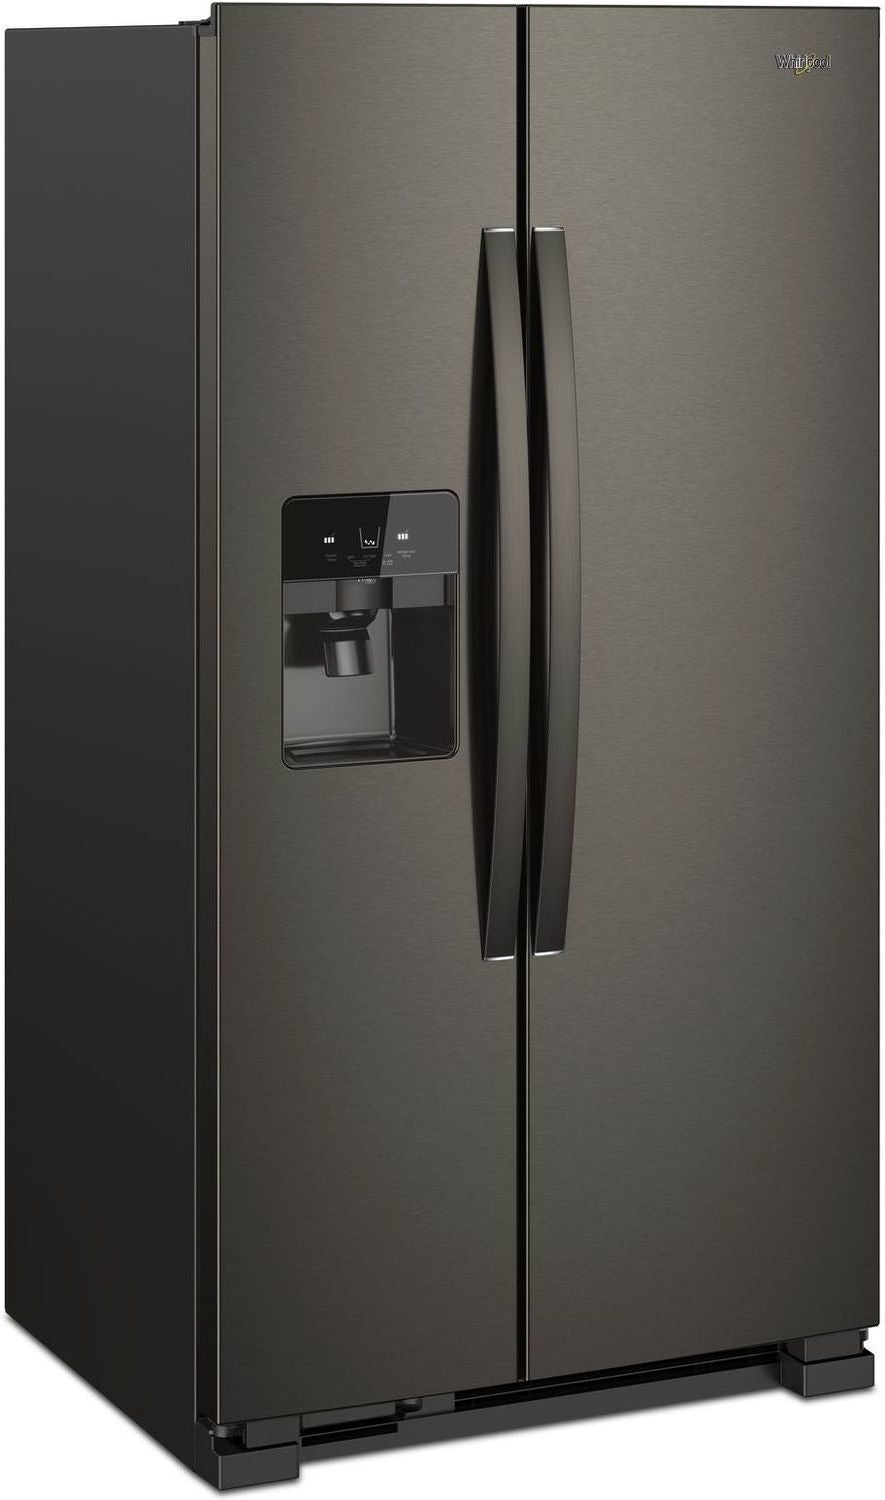 Whirlpool Black Stainless Steel Side-by-Side Refrigerator (21 Cu. Ft.) - WRS321SDHV